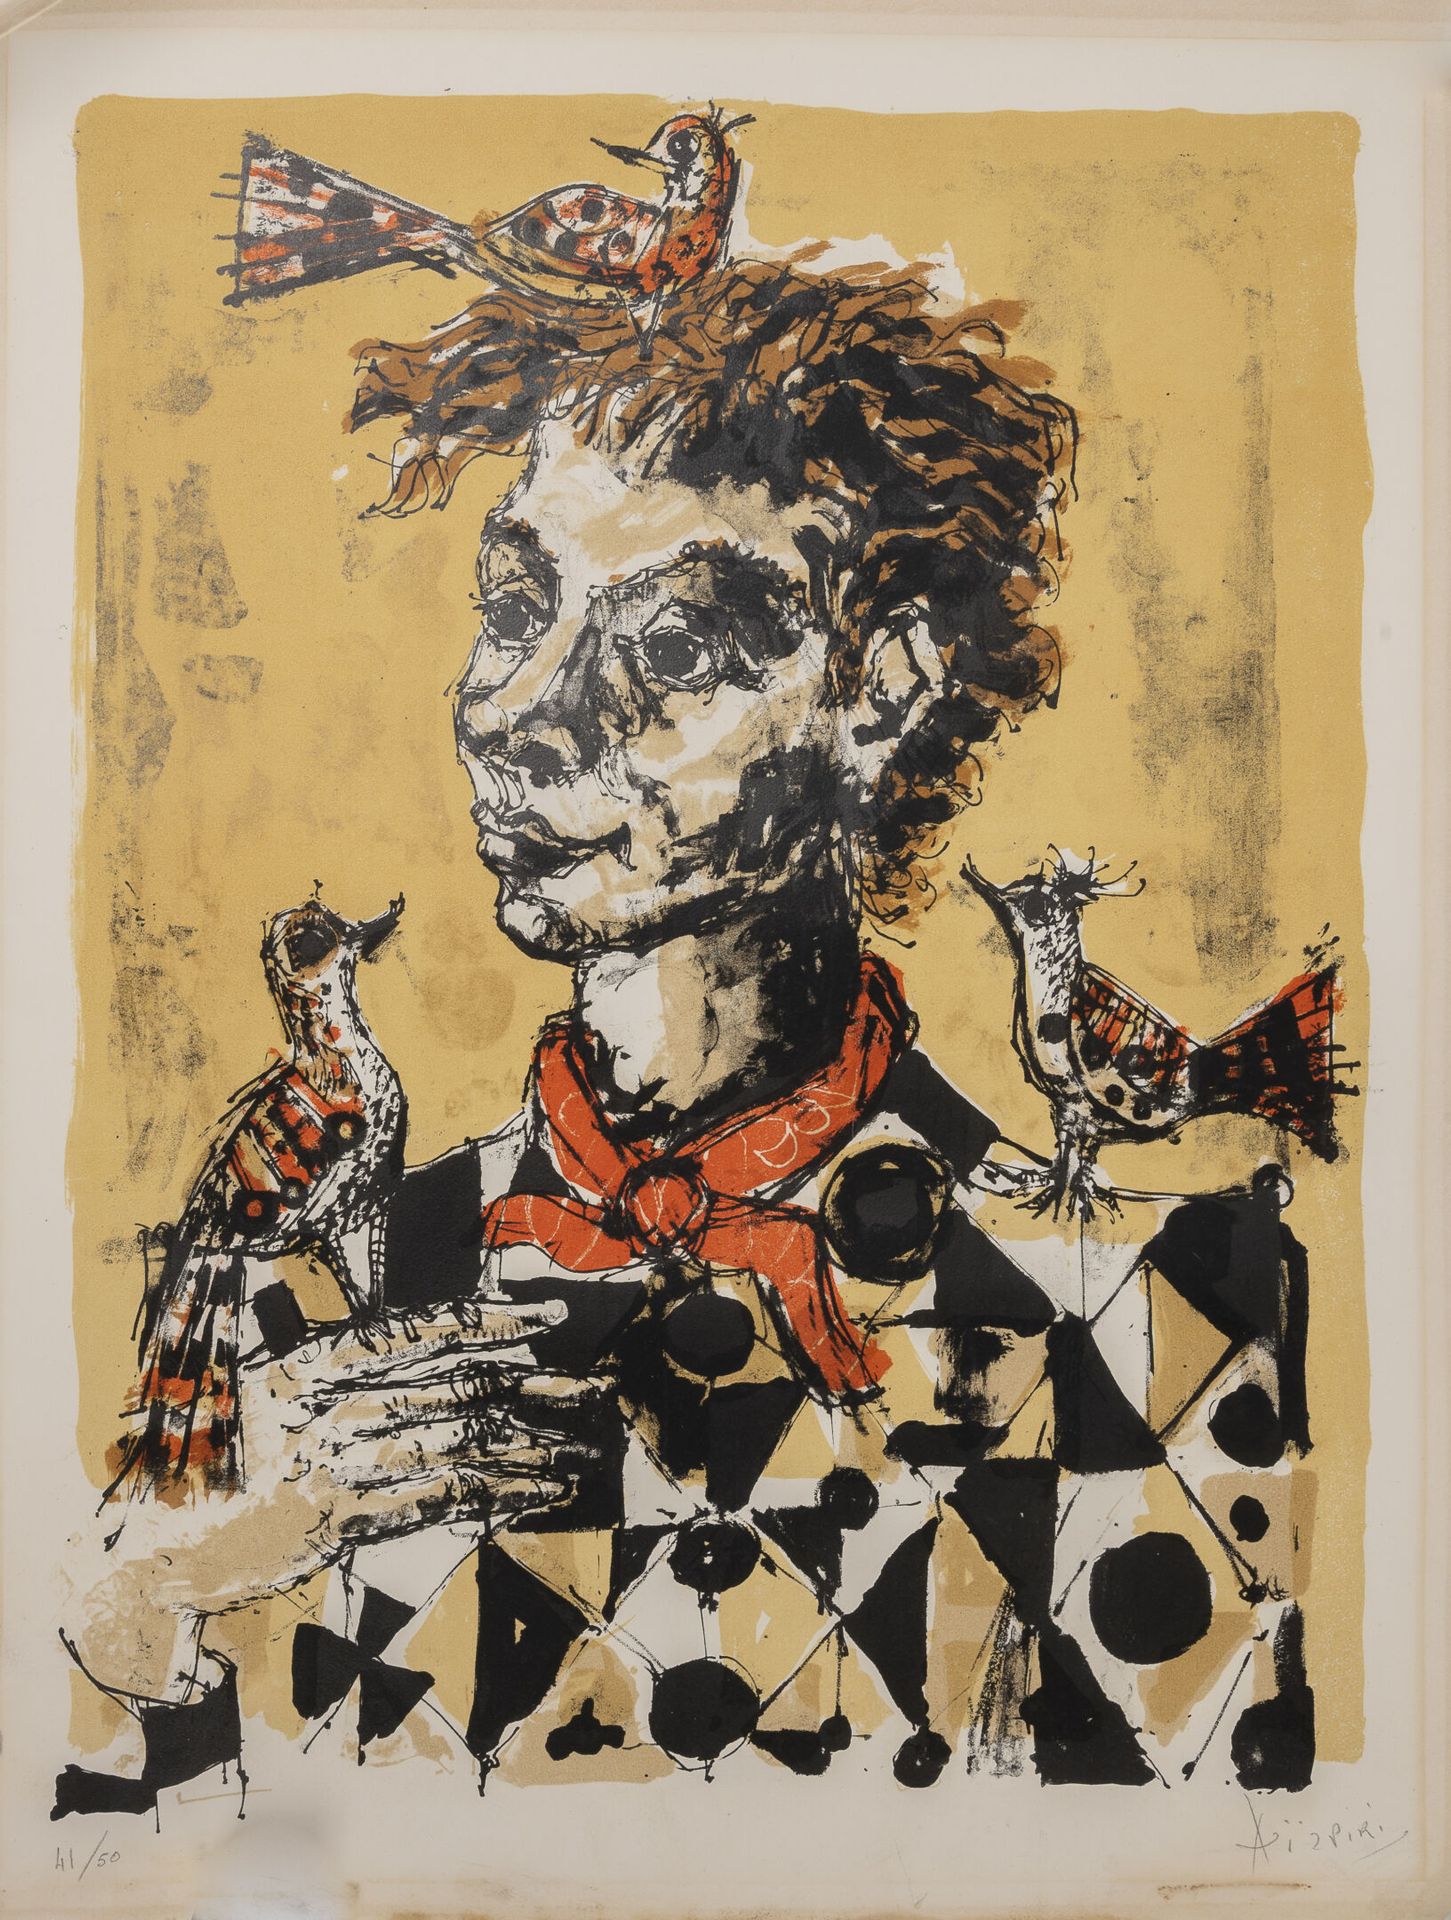 Paul AIZPIRI (1919-2016) Clown with three birds.

Lithograph in colors on paper.&hellip;